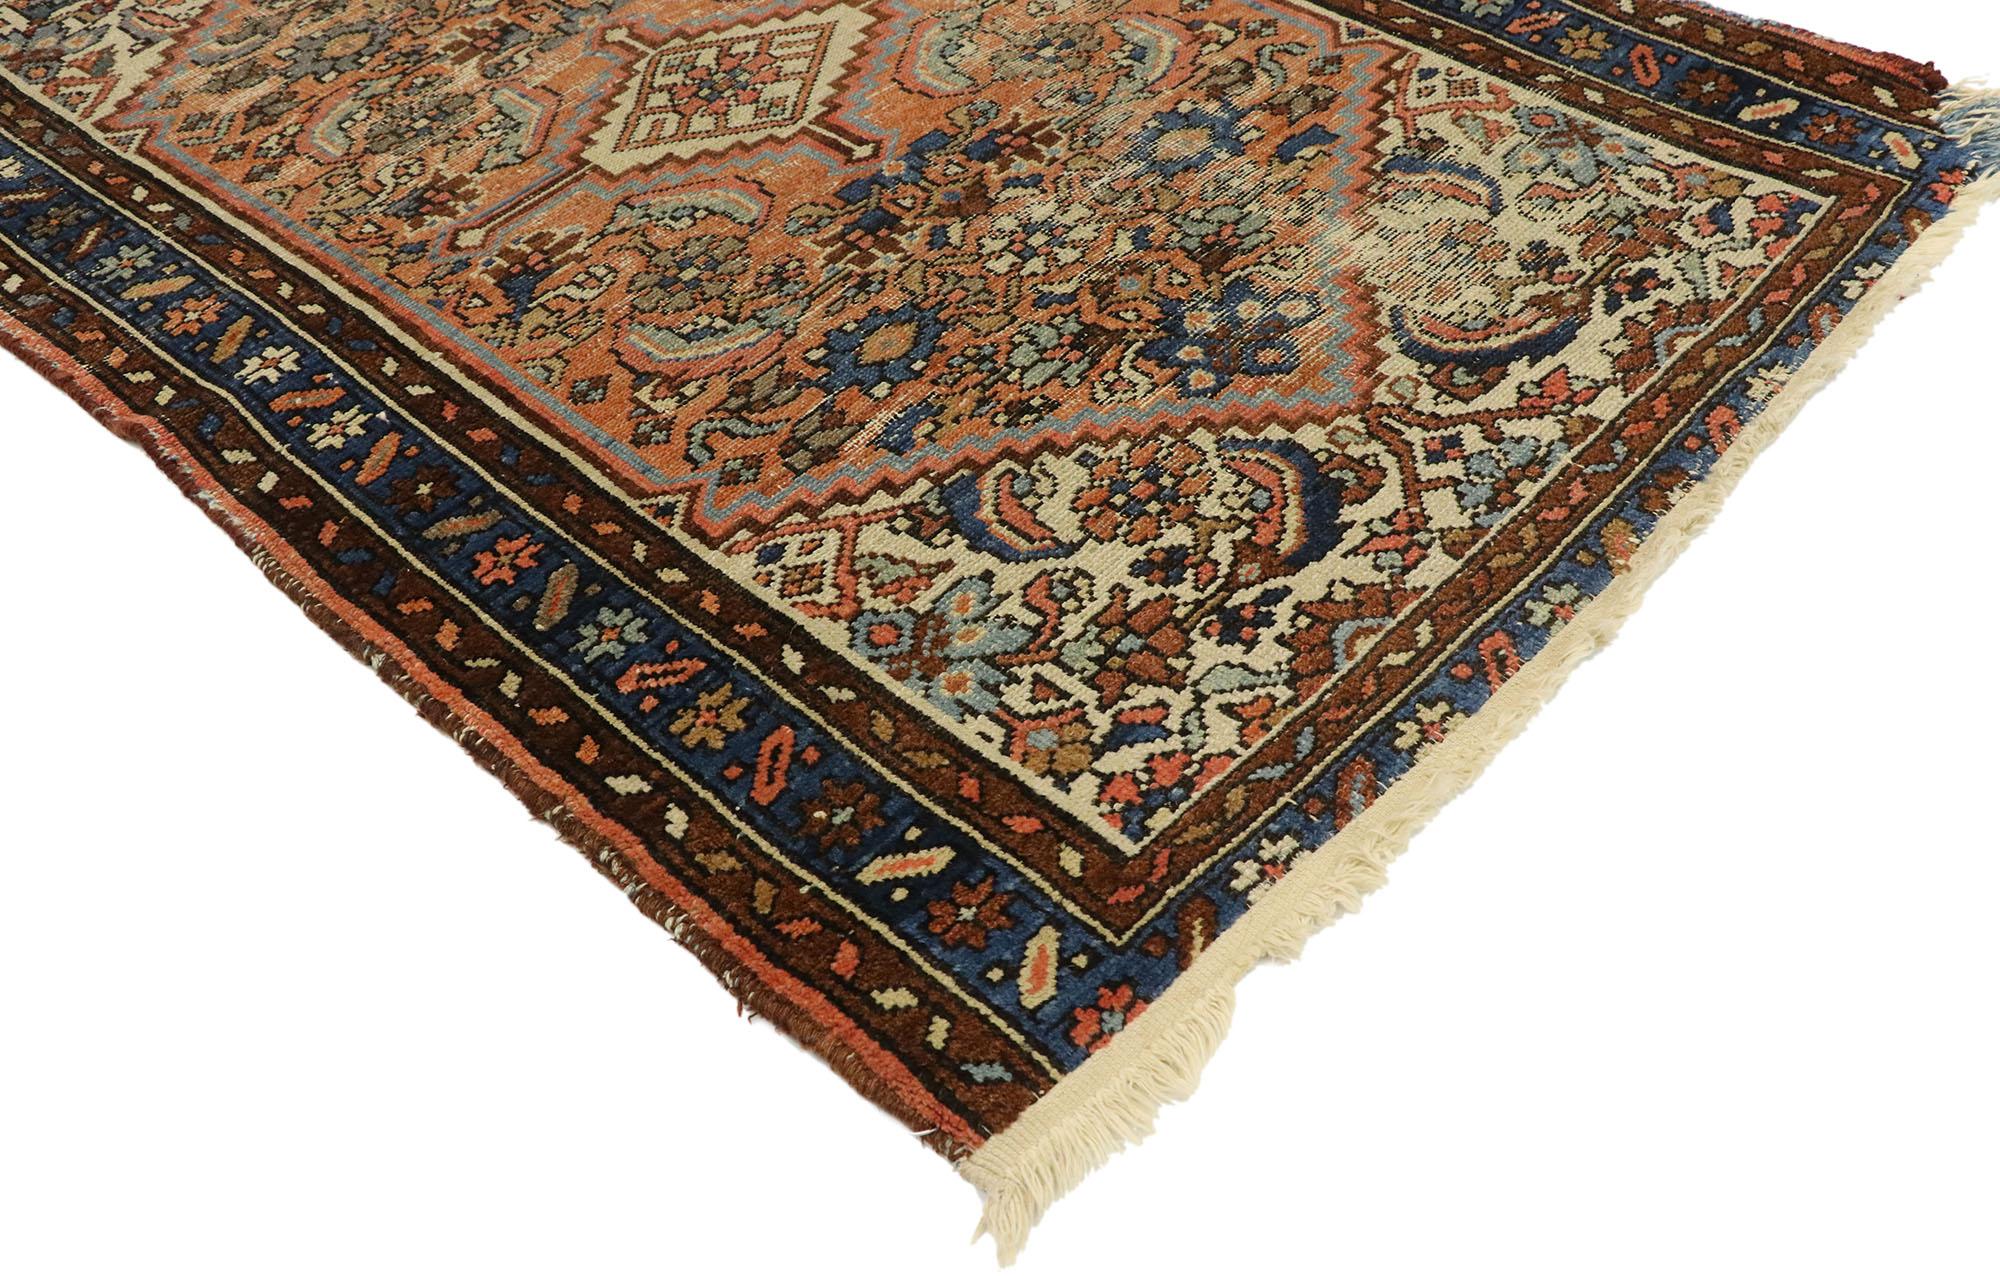 74912, distressed antique Persian Hamadan Accent rug with Romantic Industrial style. Emanating exquisite grace and a lovingly time-worn composition, this hand knotted wool distressed antique Persian rug is the epitome of authentic antique character